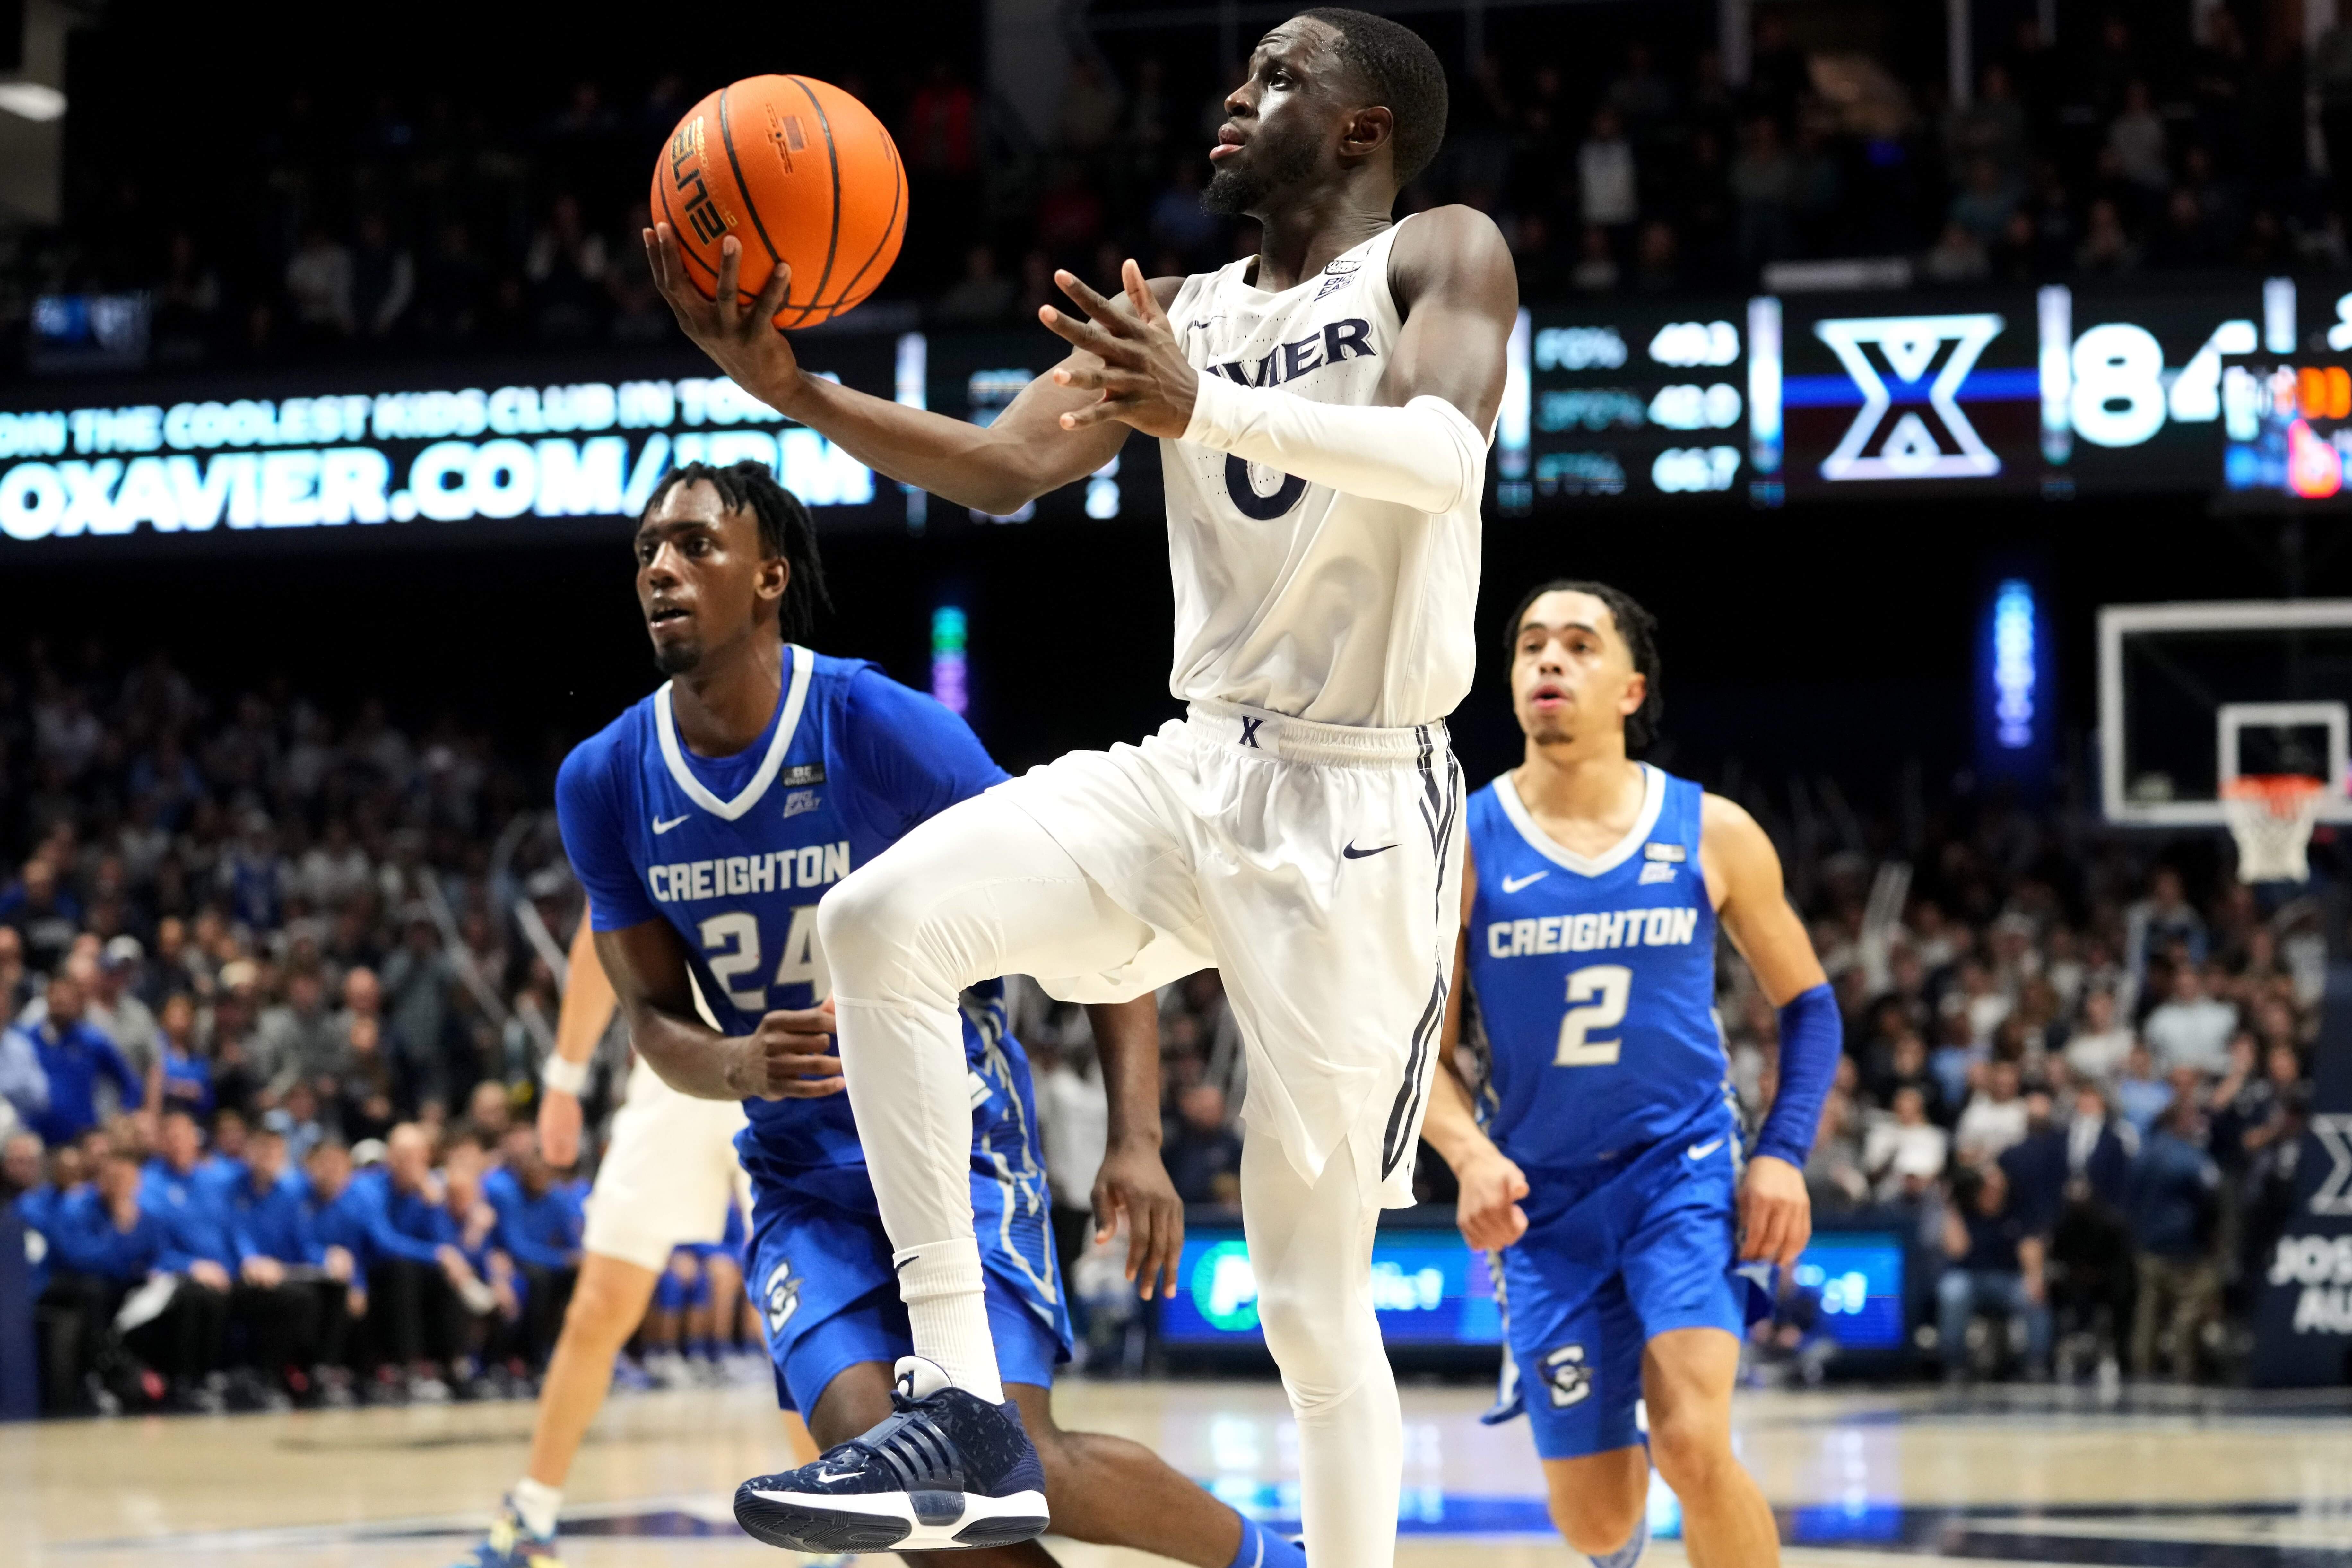 Marquette vs Xavier Odds, Picks and Predictions: Boum Lowers the Boom